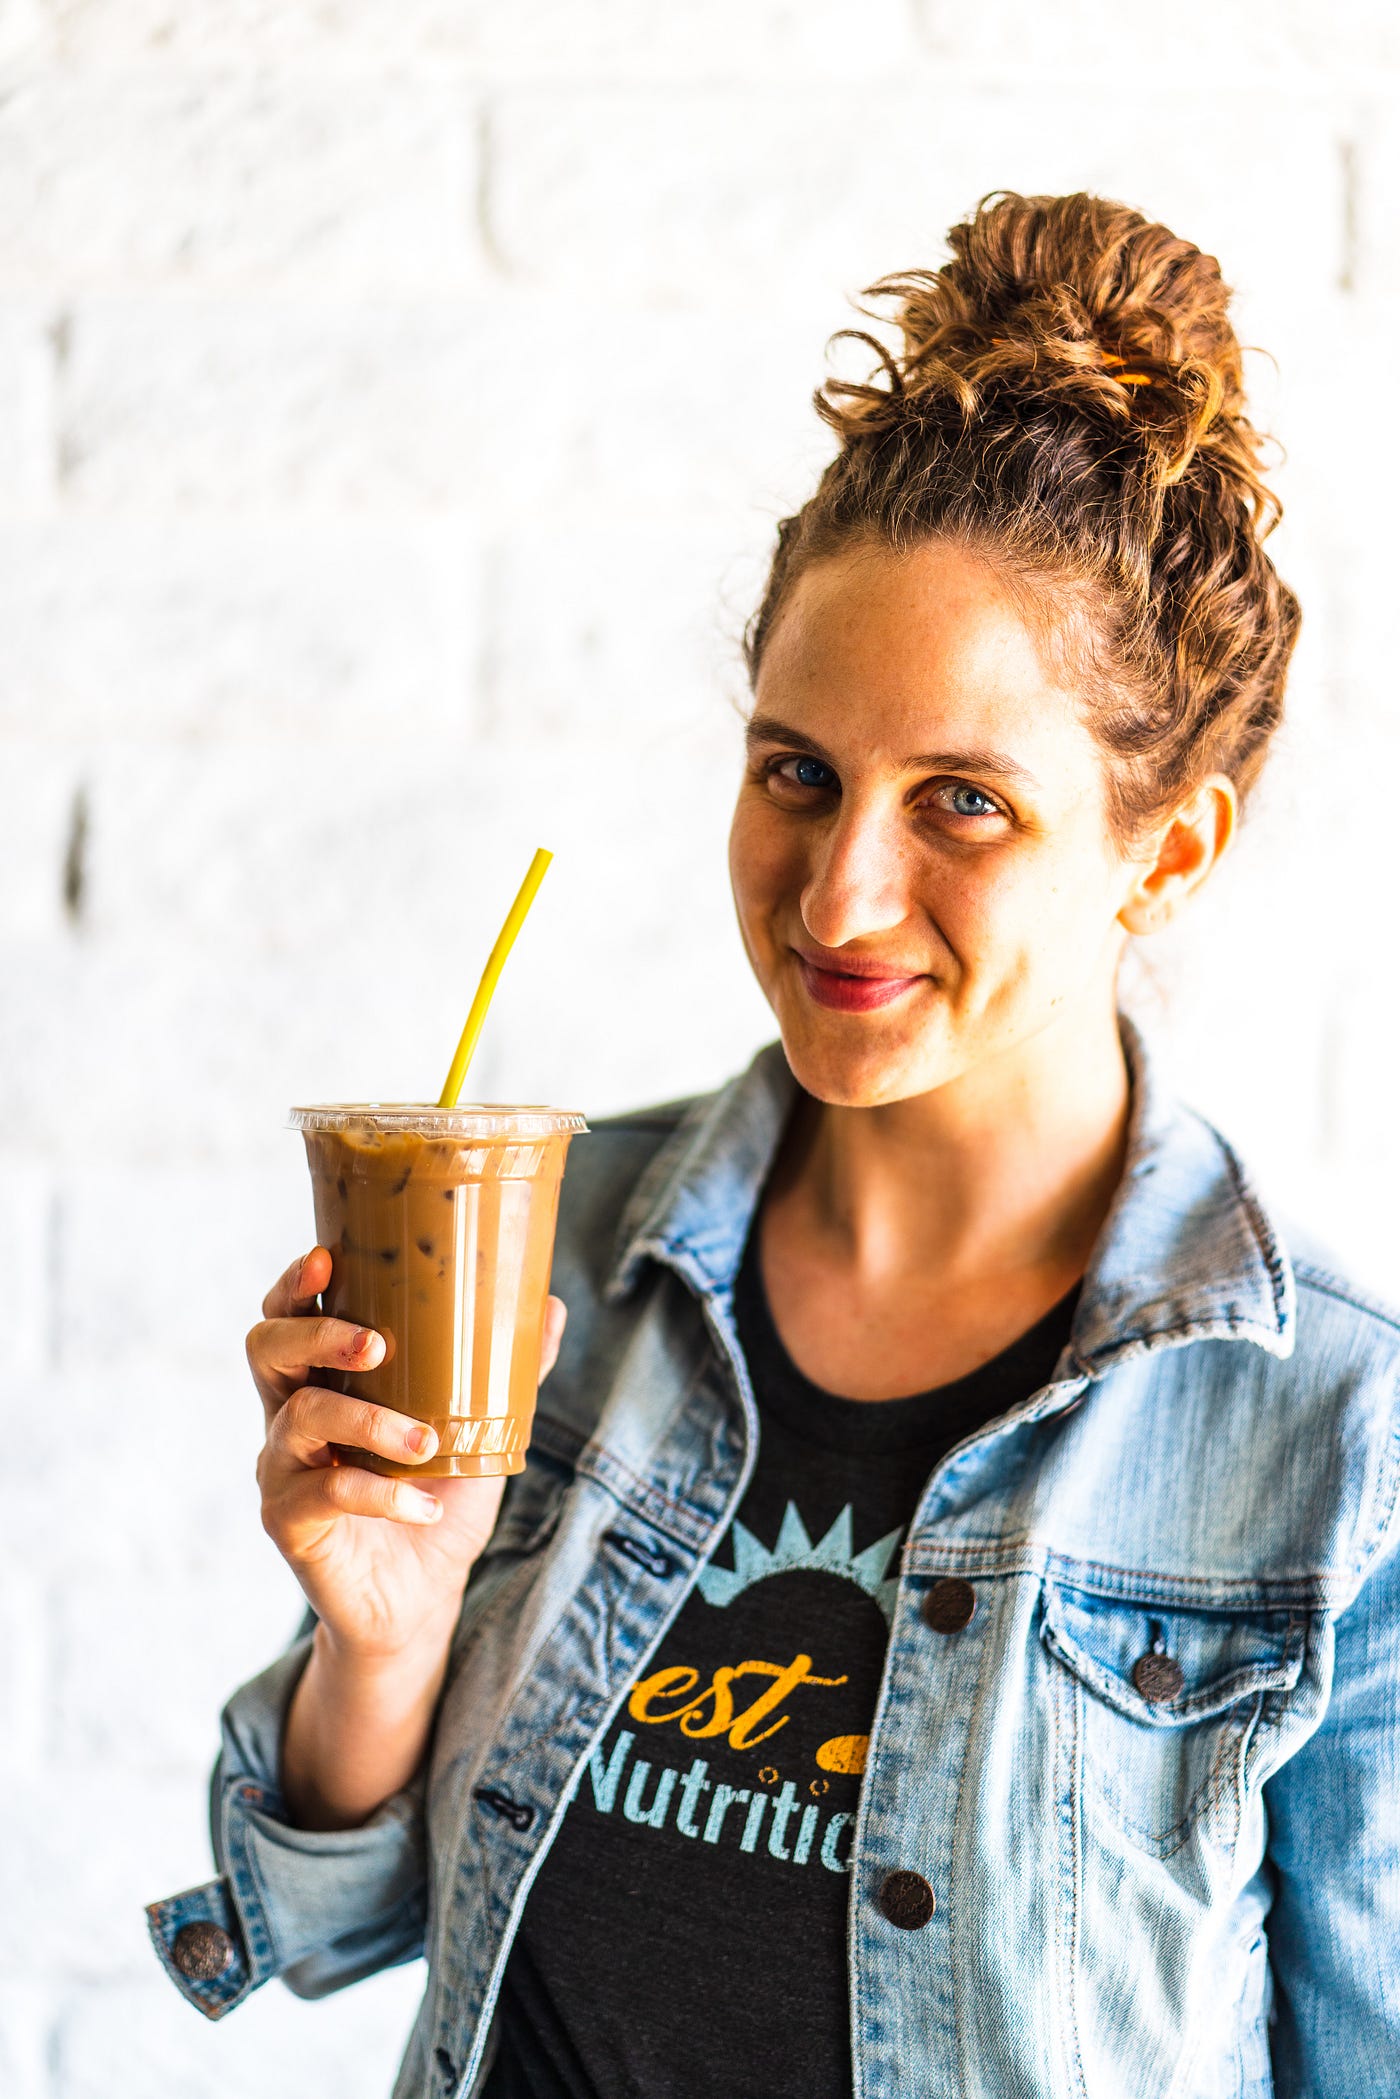 Female Founders: Sarah Pilger of Best Life Nutrition On The Five Things You  Need To Thrive and Succeed as a Woman Founder, by Candice Georgiadis, Authority Magazine